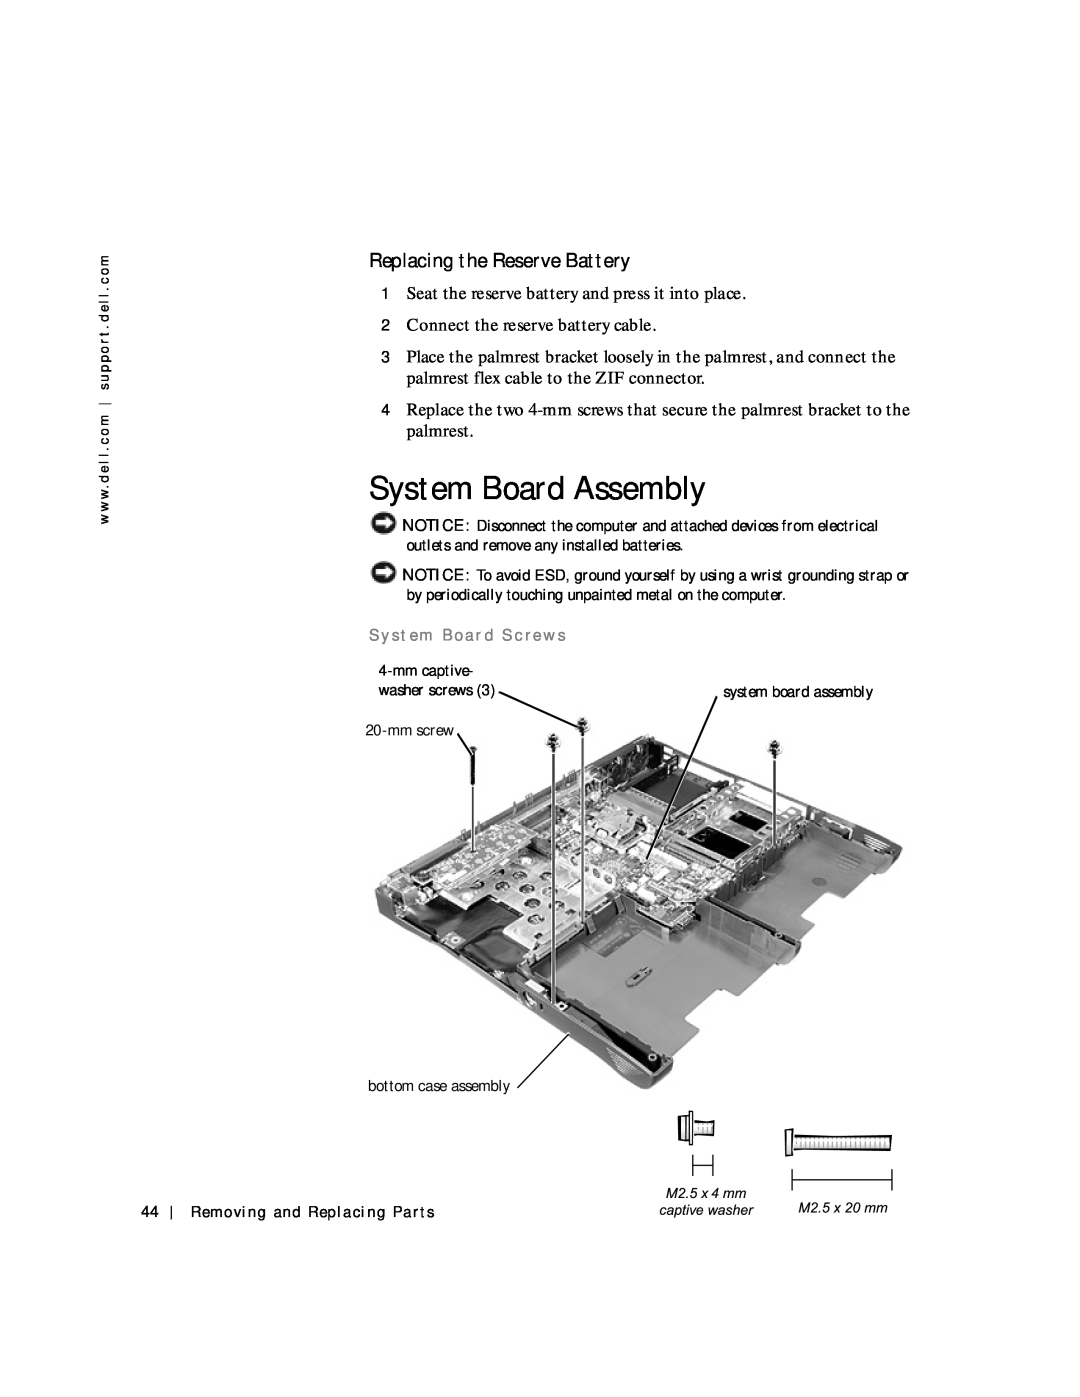 Applied Energy Products C800 service manual System Board Assembly, Replacing the Reserve Battery 